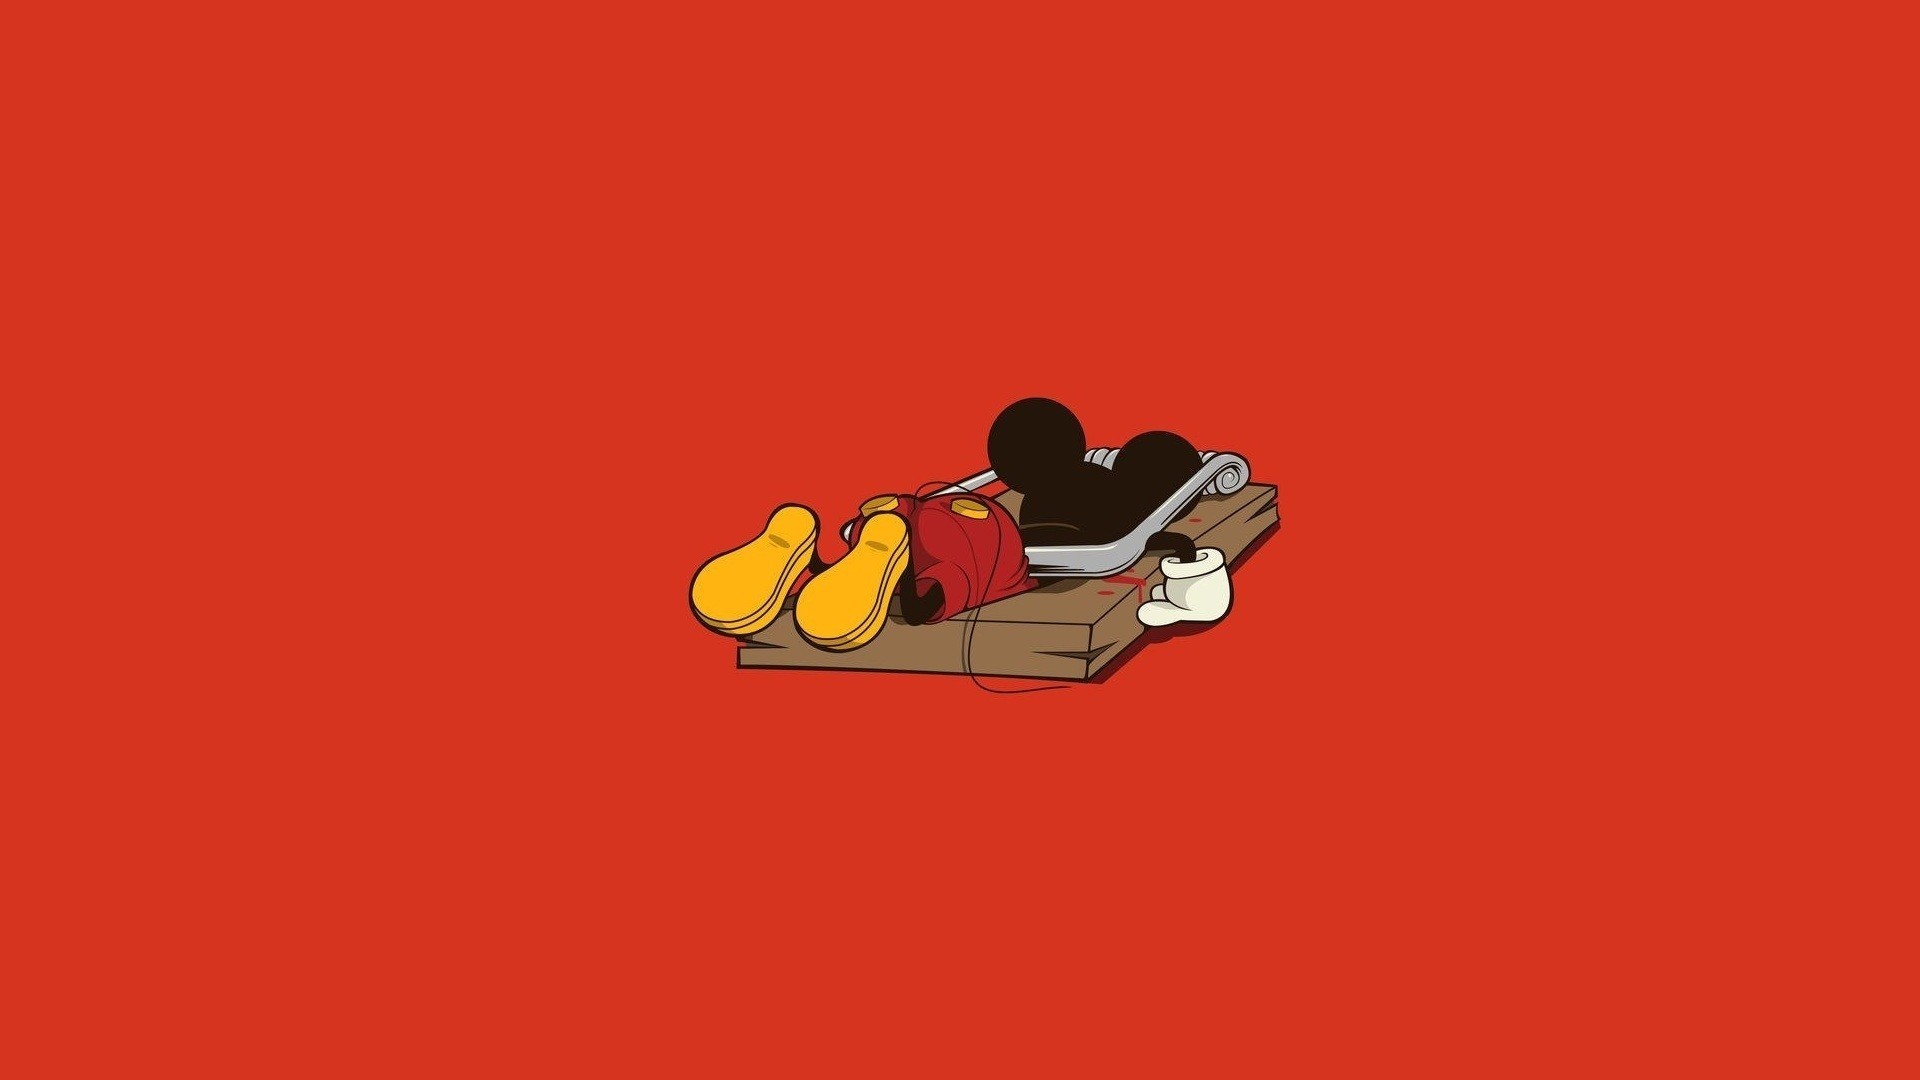 General 1920x1080 mousetrap red background blood simple background Mickey Mouse red dark humor